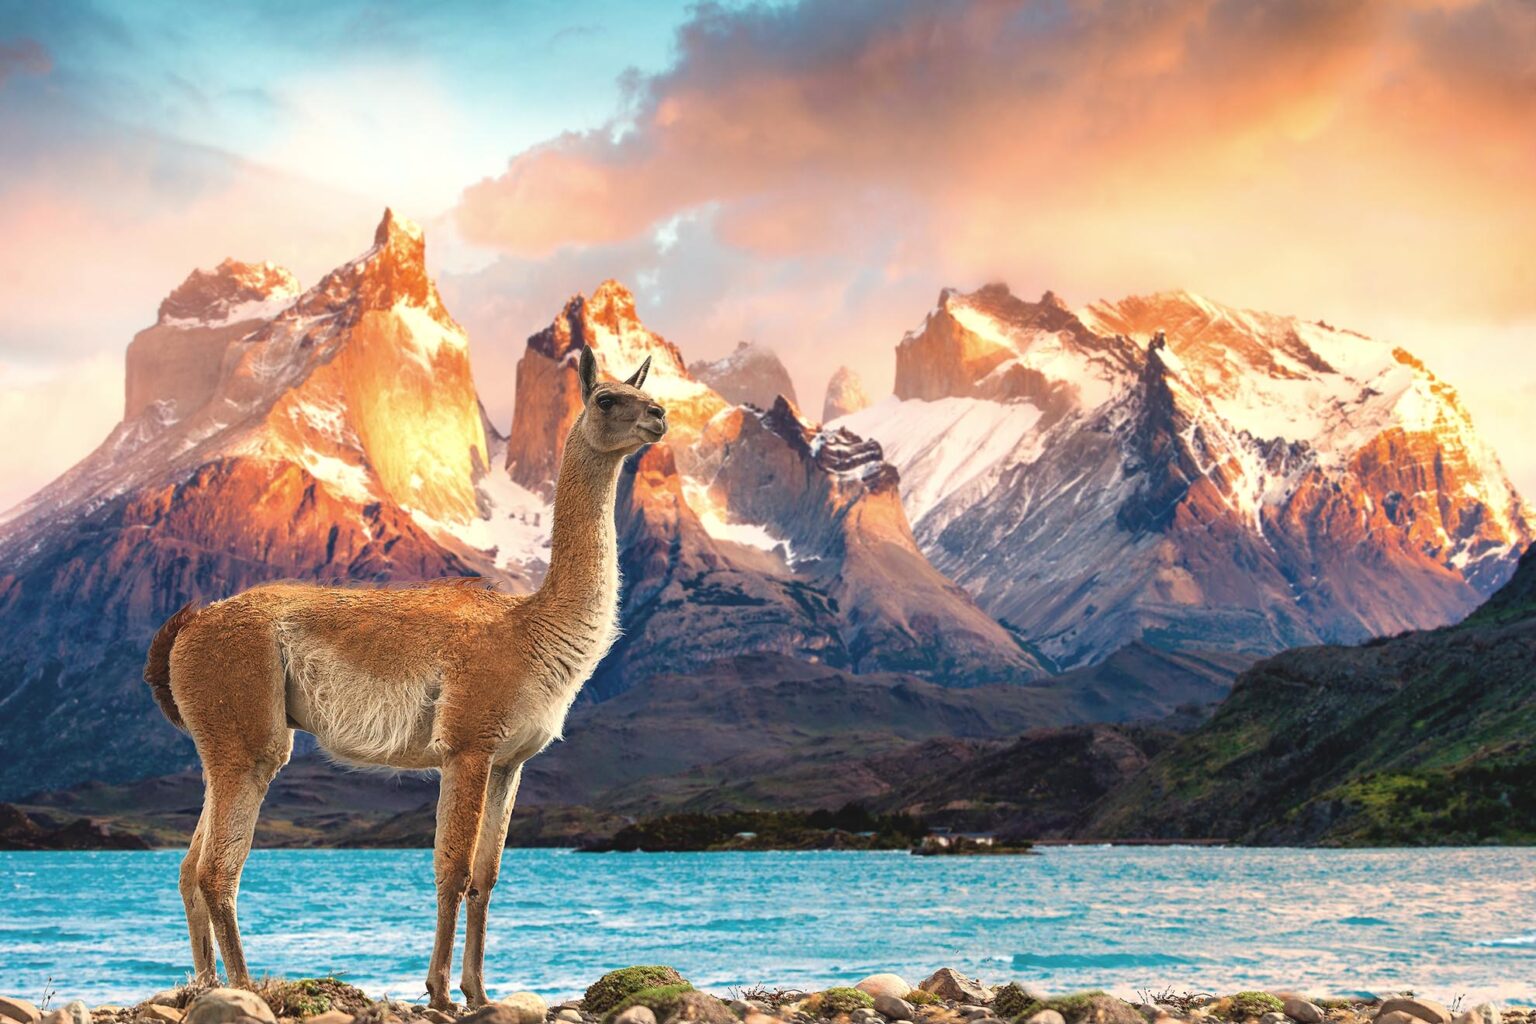 Guanaco in the foreground with mountains in the background